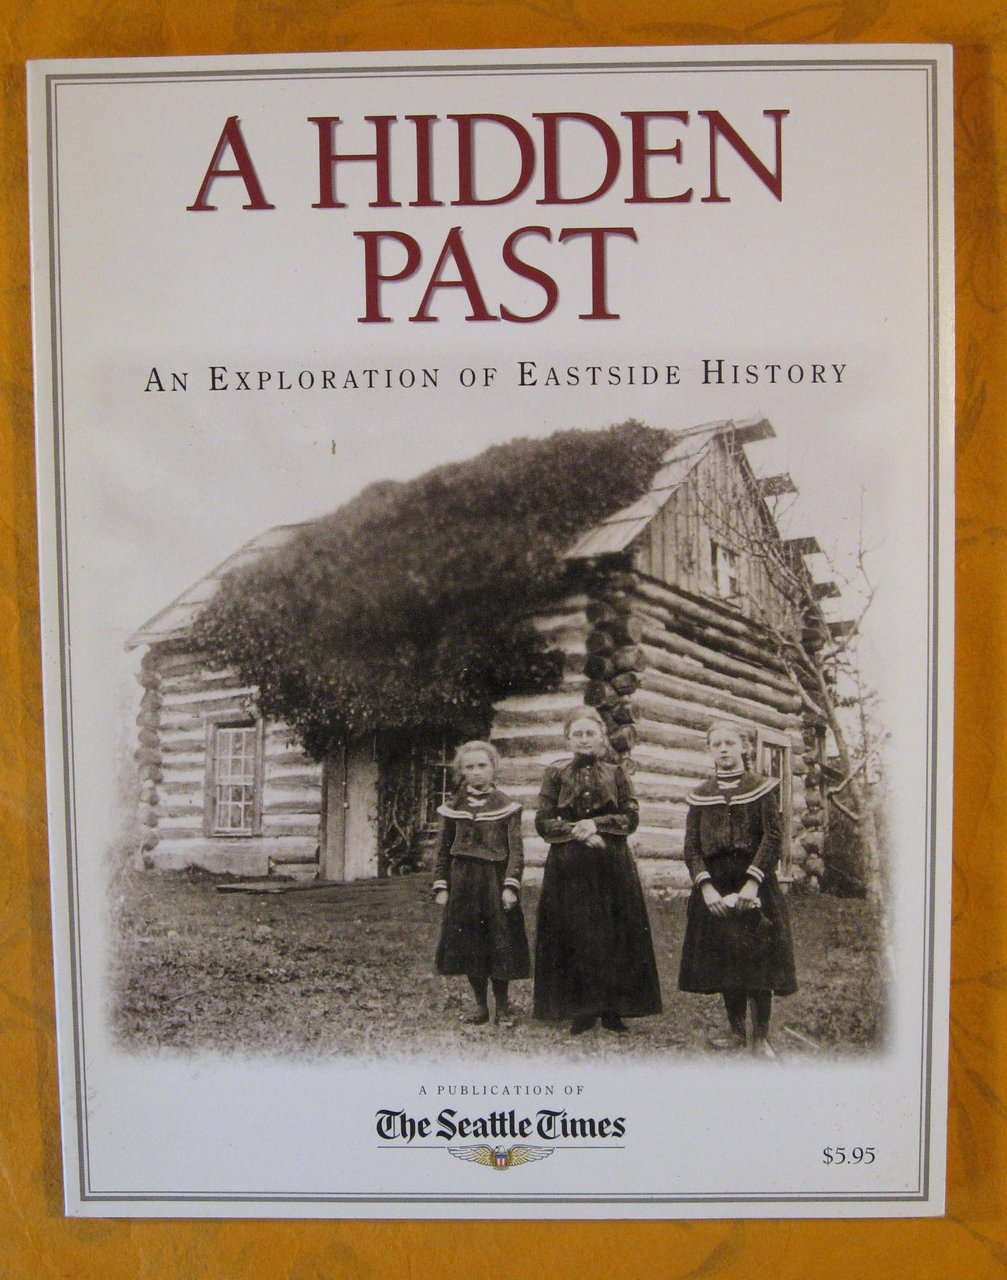 A Hidden Past: An Exploration of Eastside History